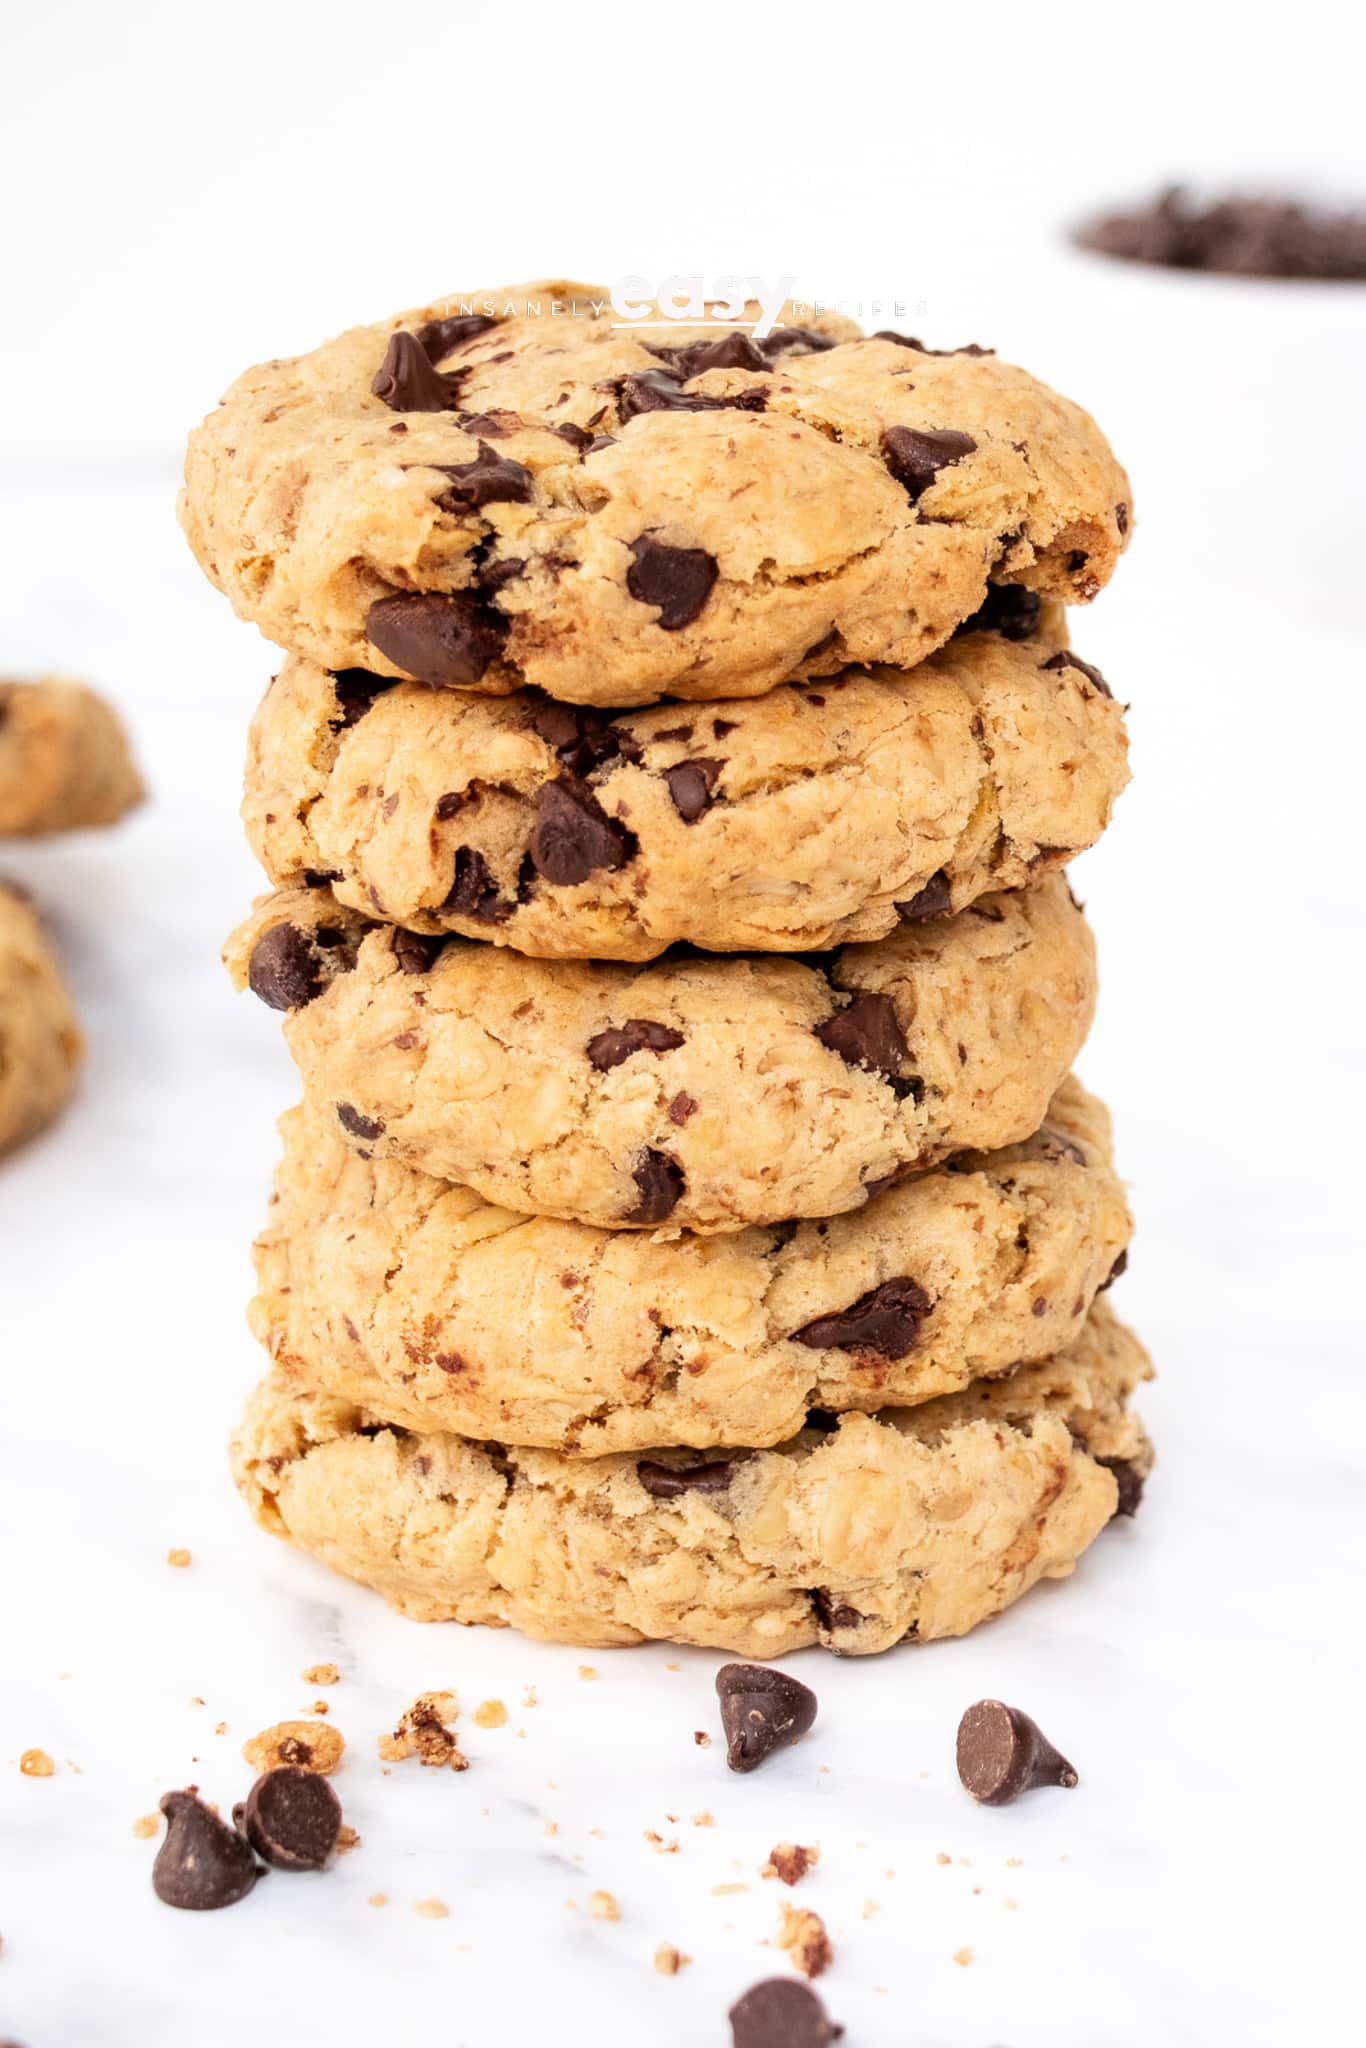 Photo of a stack of 5 Vegan Oatmeal Chocolate Chip Cookies